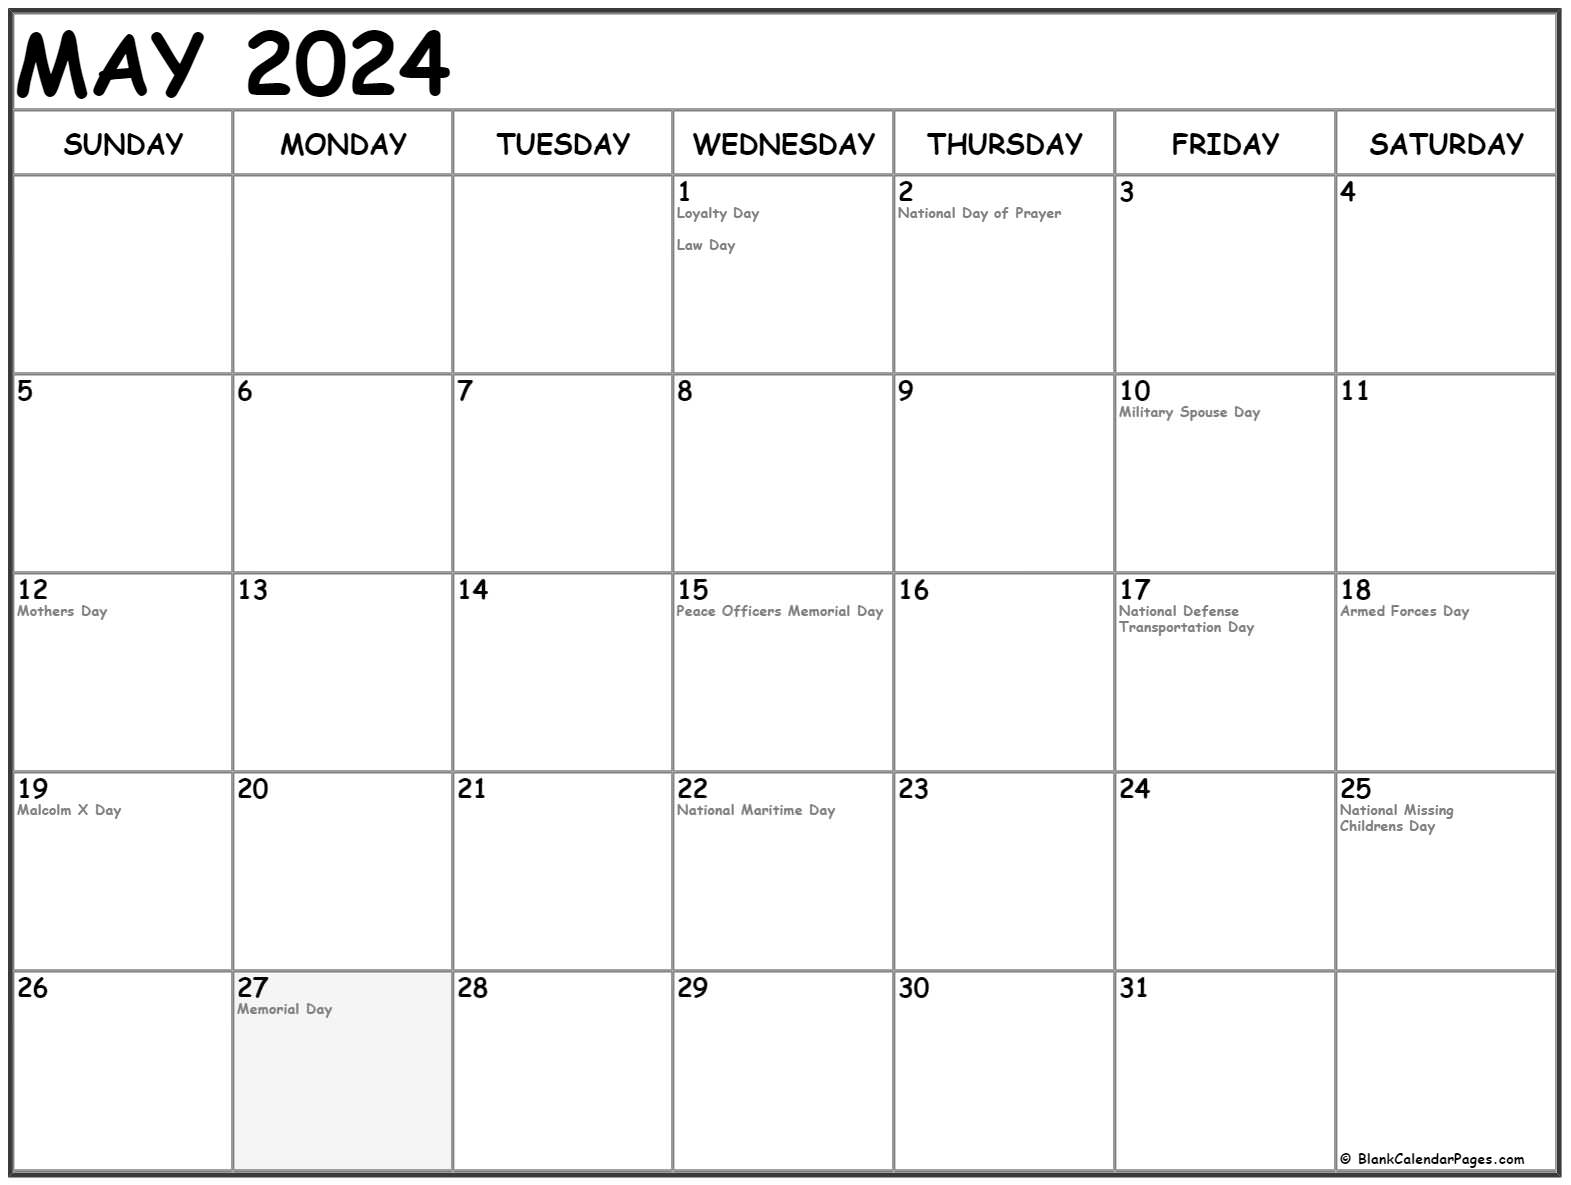 may-2023-calendar-with-american-holidays-get-latest-map-update